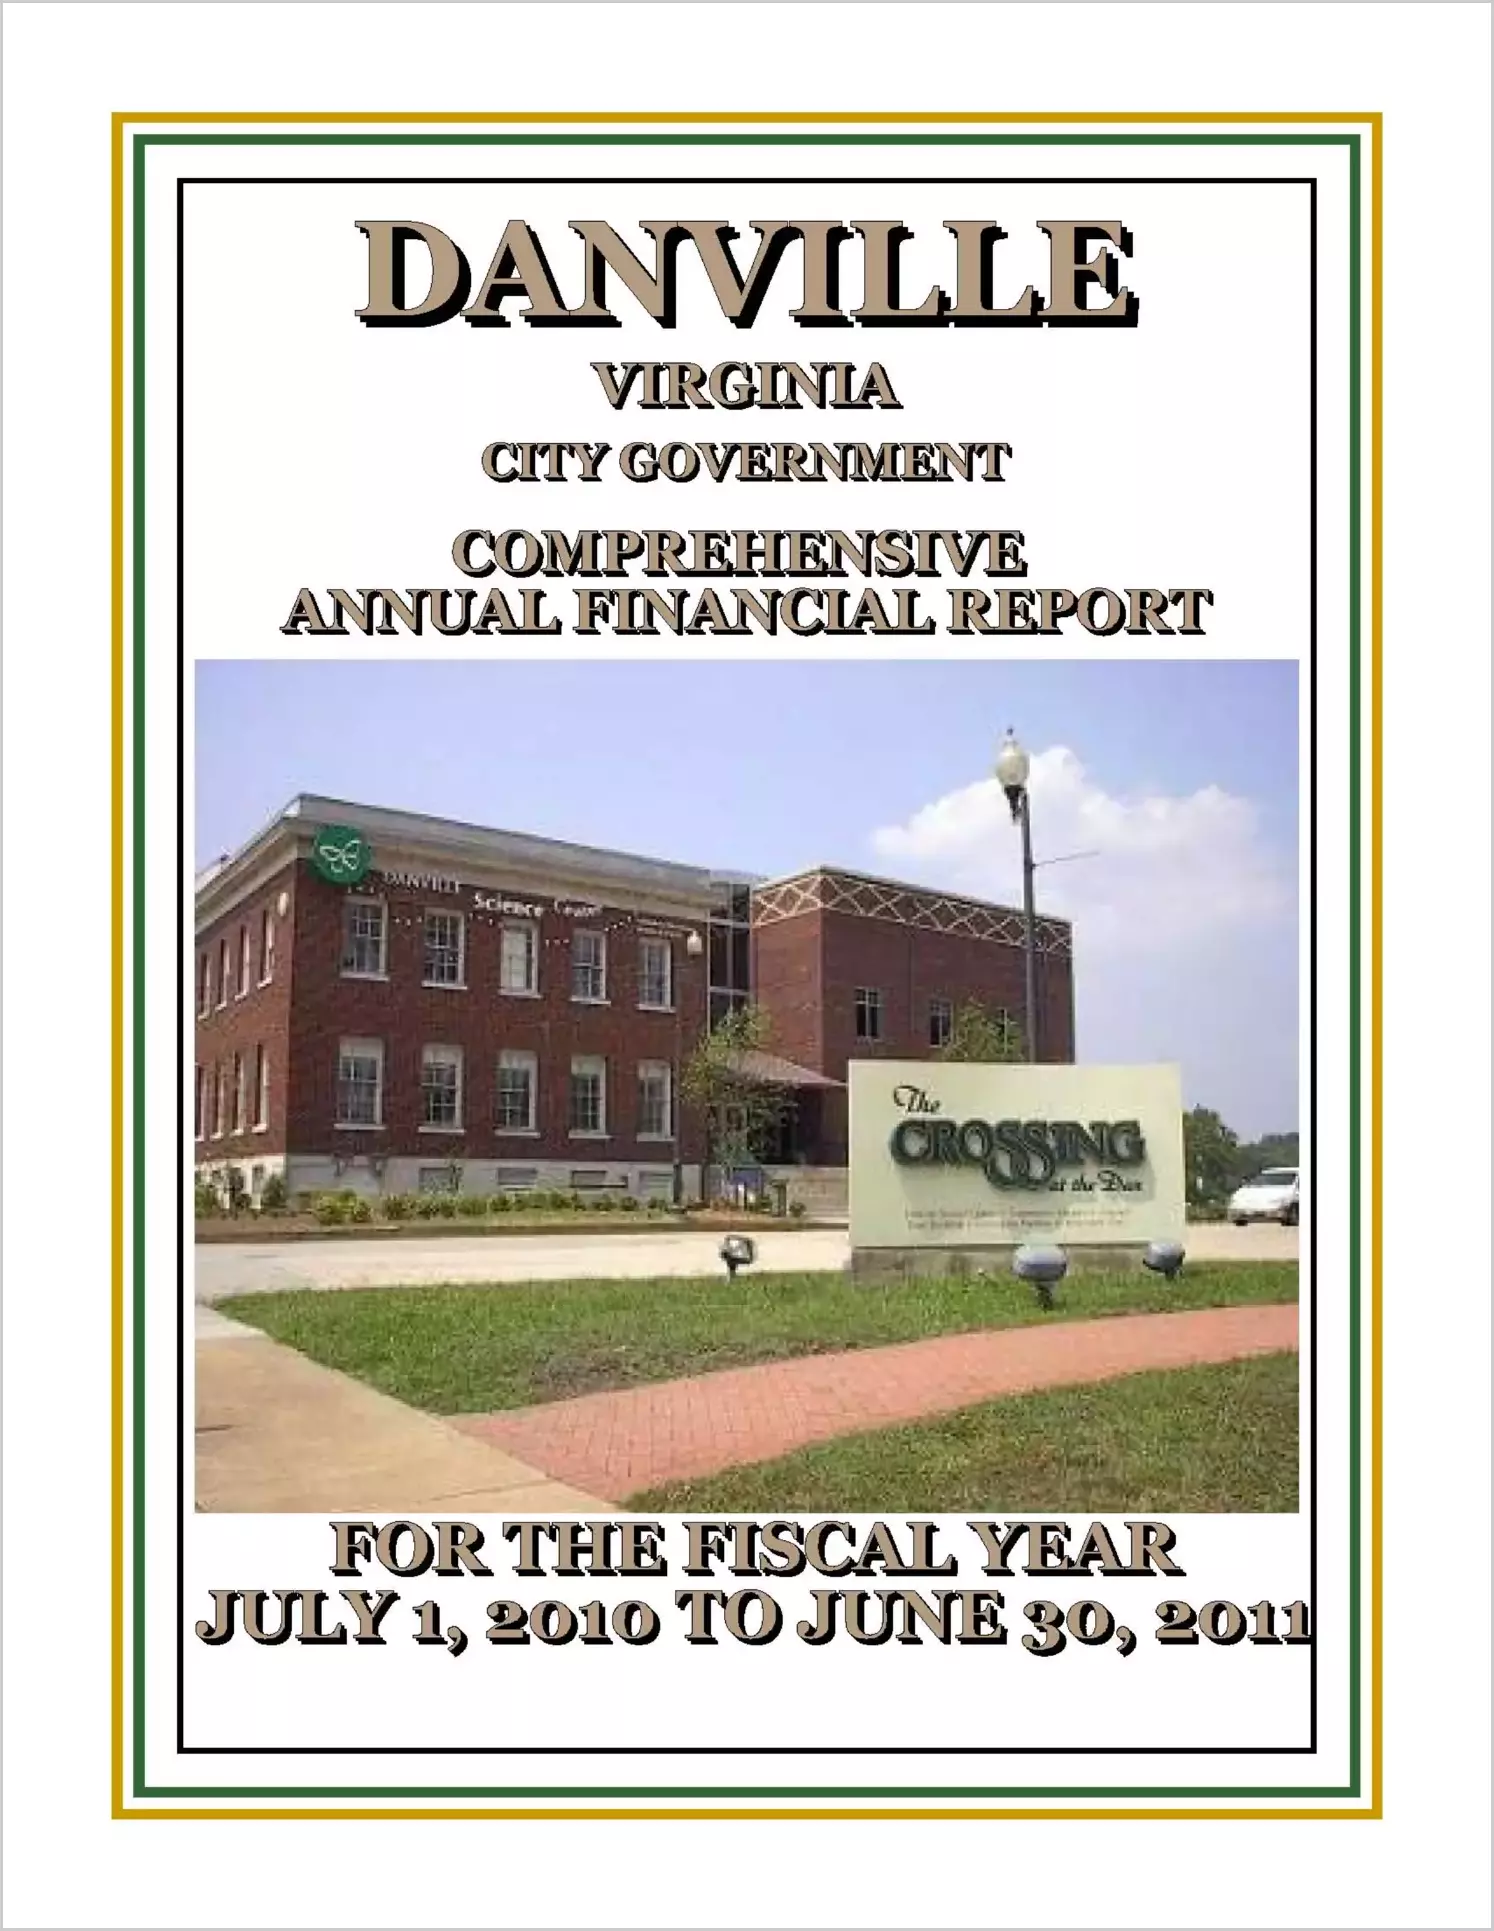 2011 Annual Financial Report for City of Danville